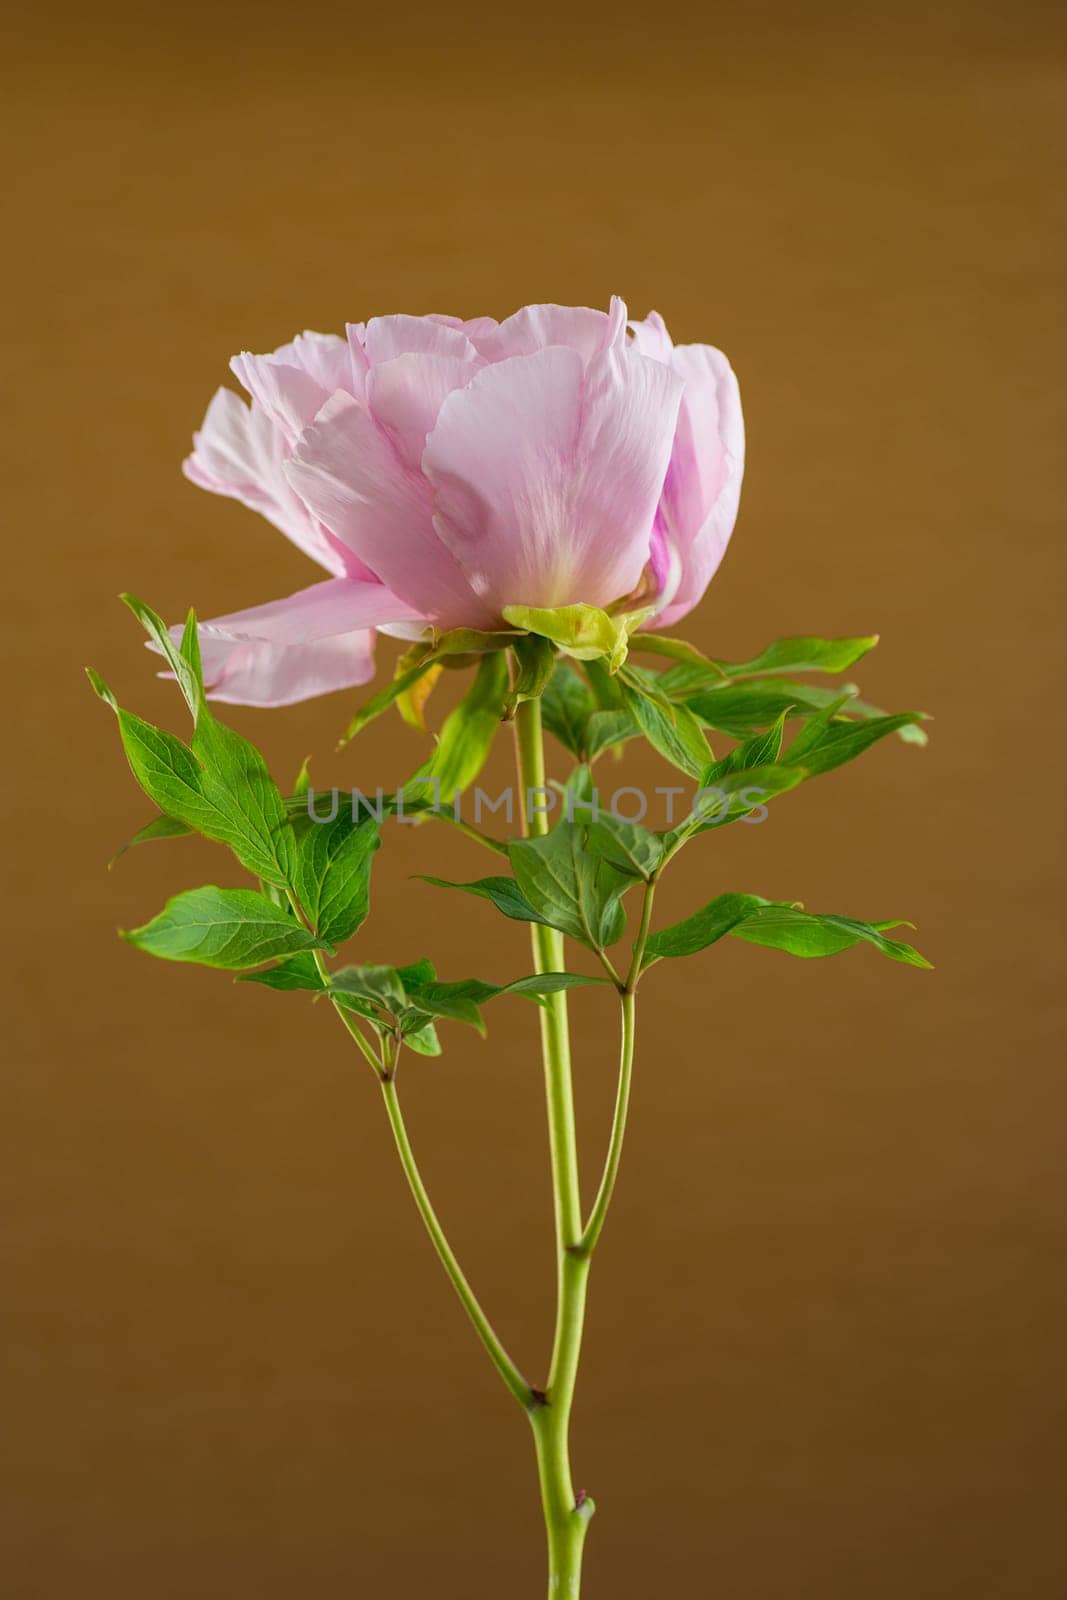 Pink tree peony flower, isolated on brown background .